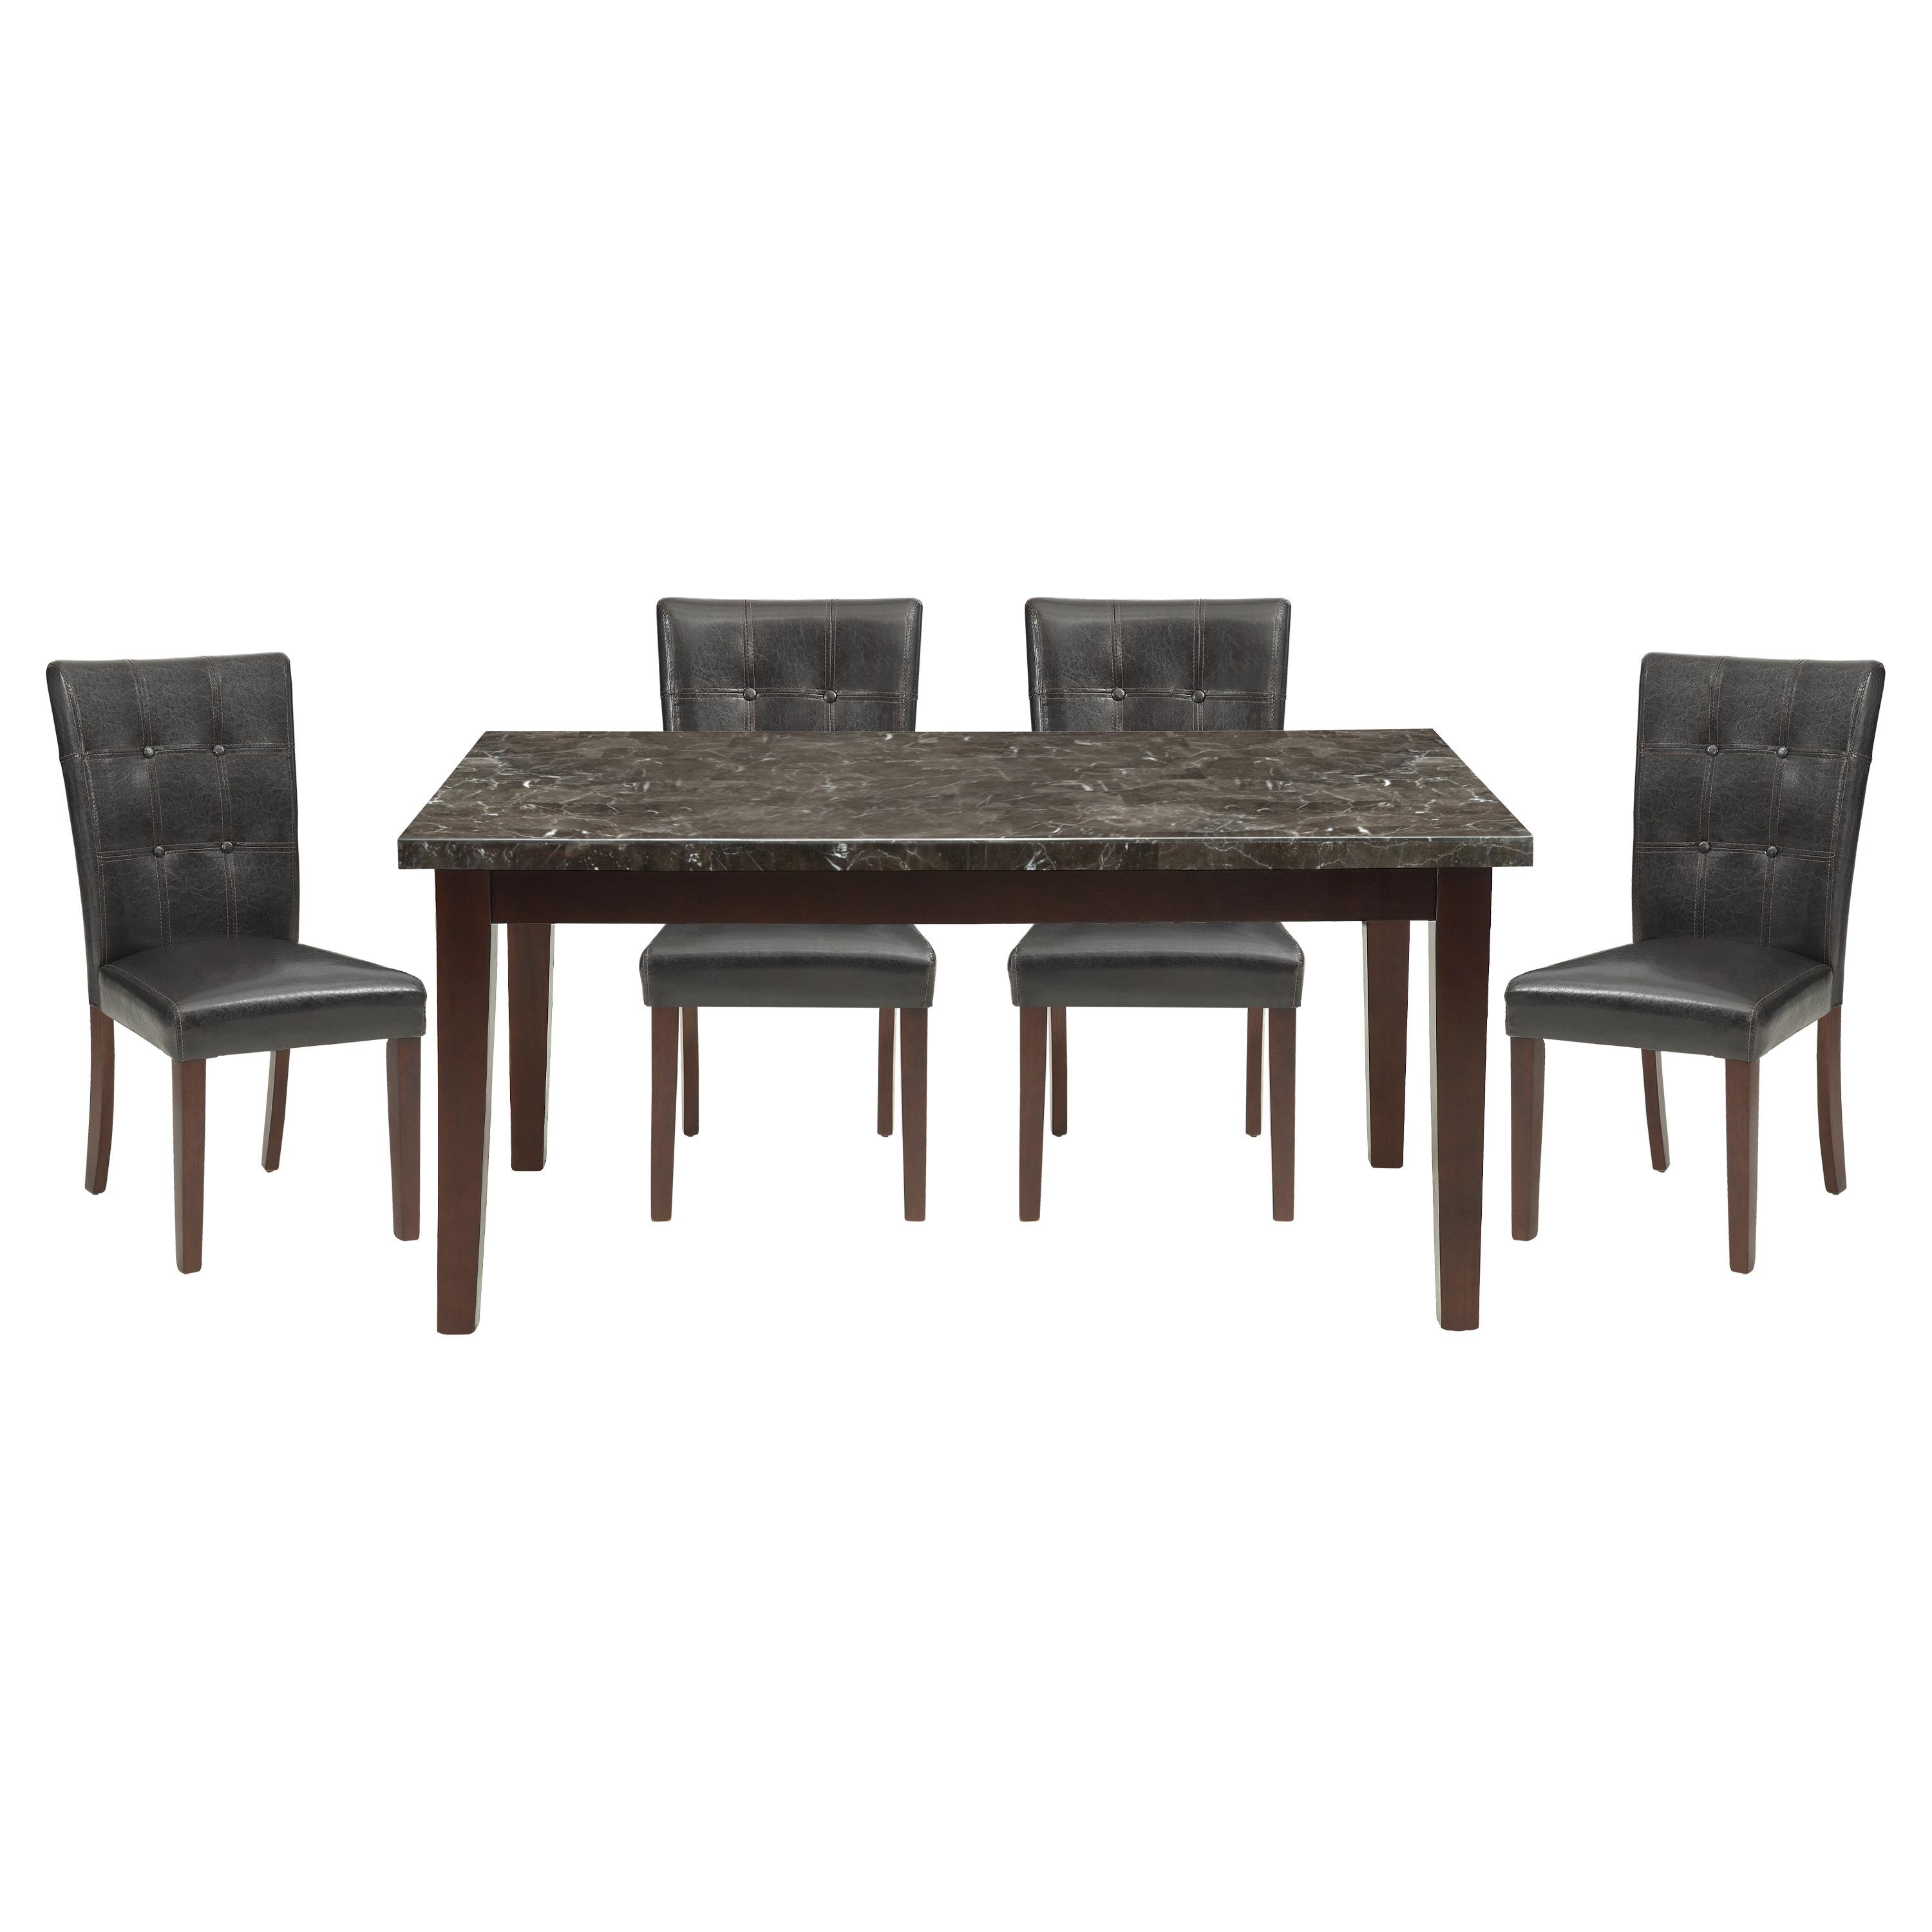 Transitional Dining Room Set 2456-64*5PC Decatur 2456-64*5PC in Espresso, Black Faux Leather